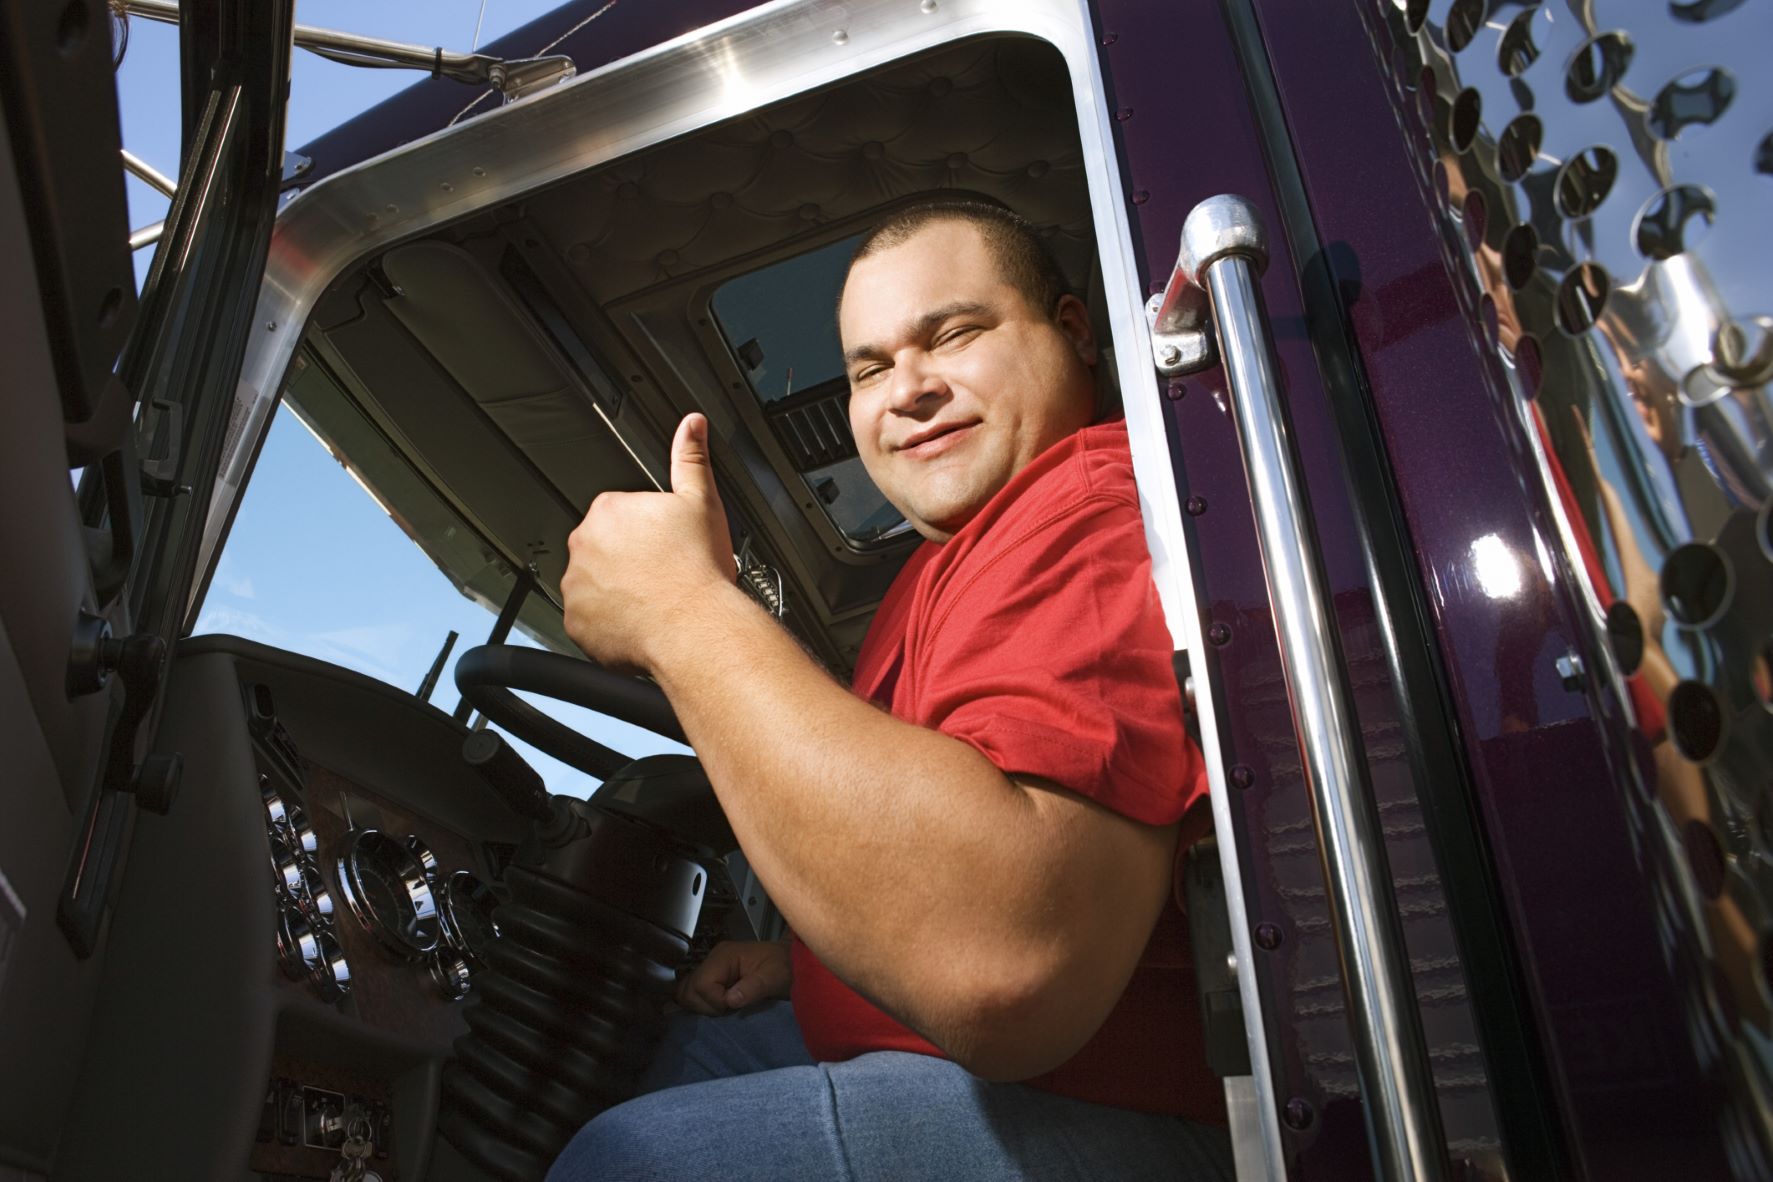 Truck driver sitting in truck giving a thumbs up